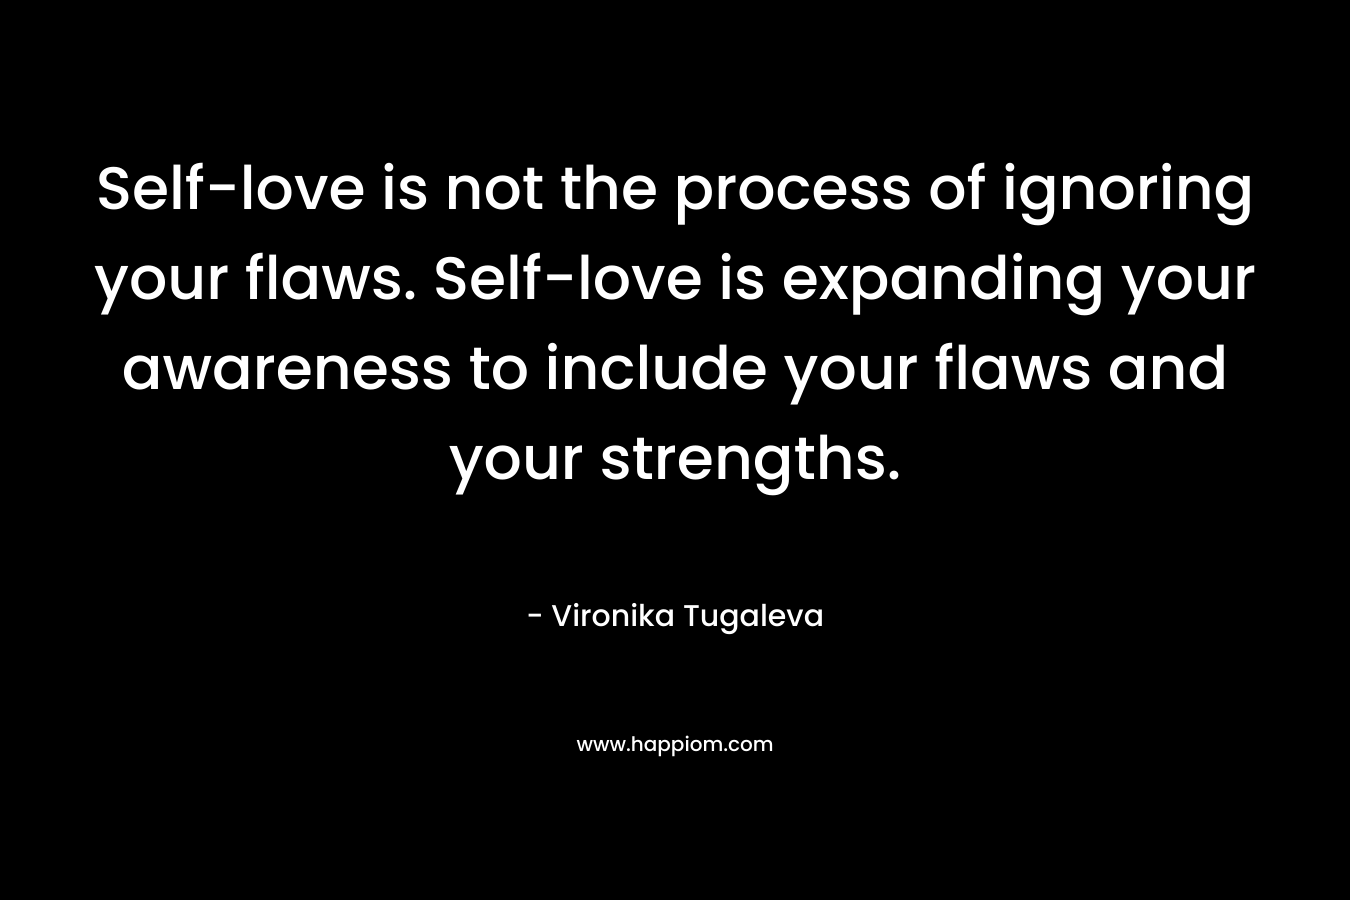 Self-love is not the process of ignoring your flaws. Self-love is expanding your awareness to include your flaws and your strengths.